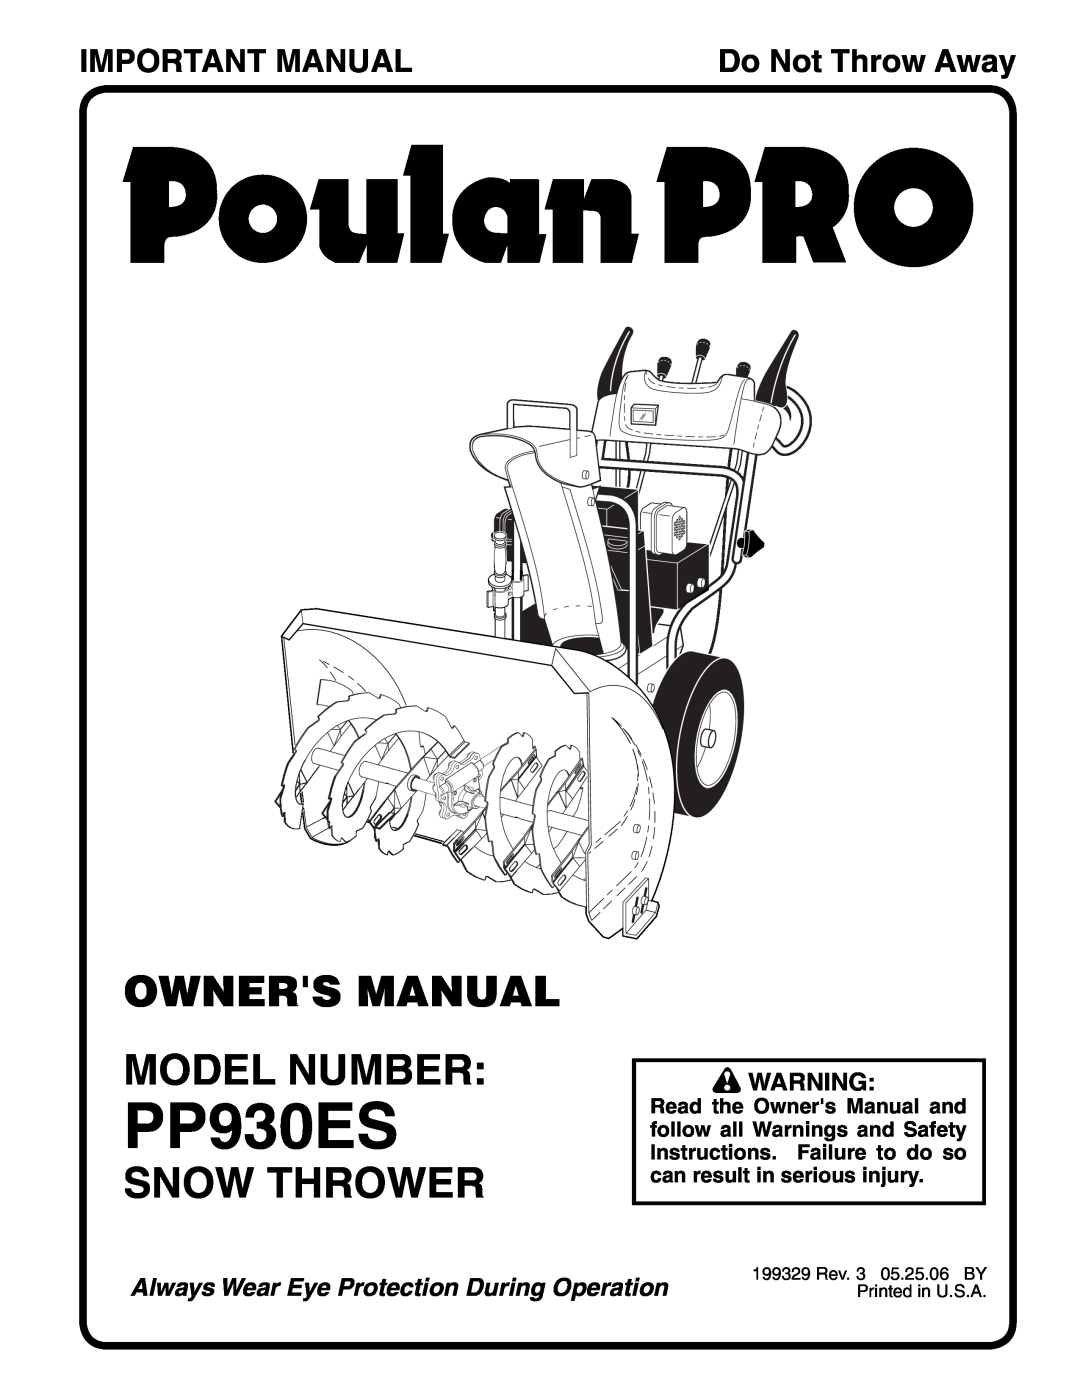 Poulan 199329, 96192000600 owner manual Snow Thrower, Important Manual, PP930ES, Do Not Throw Away 